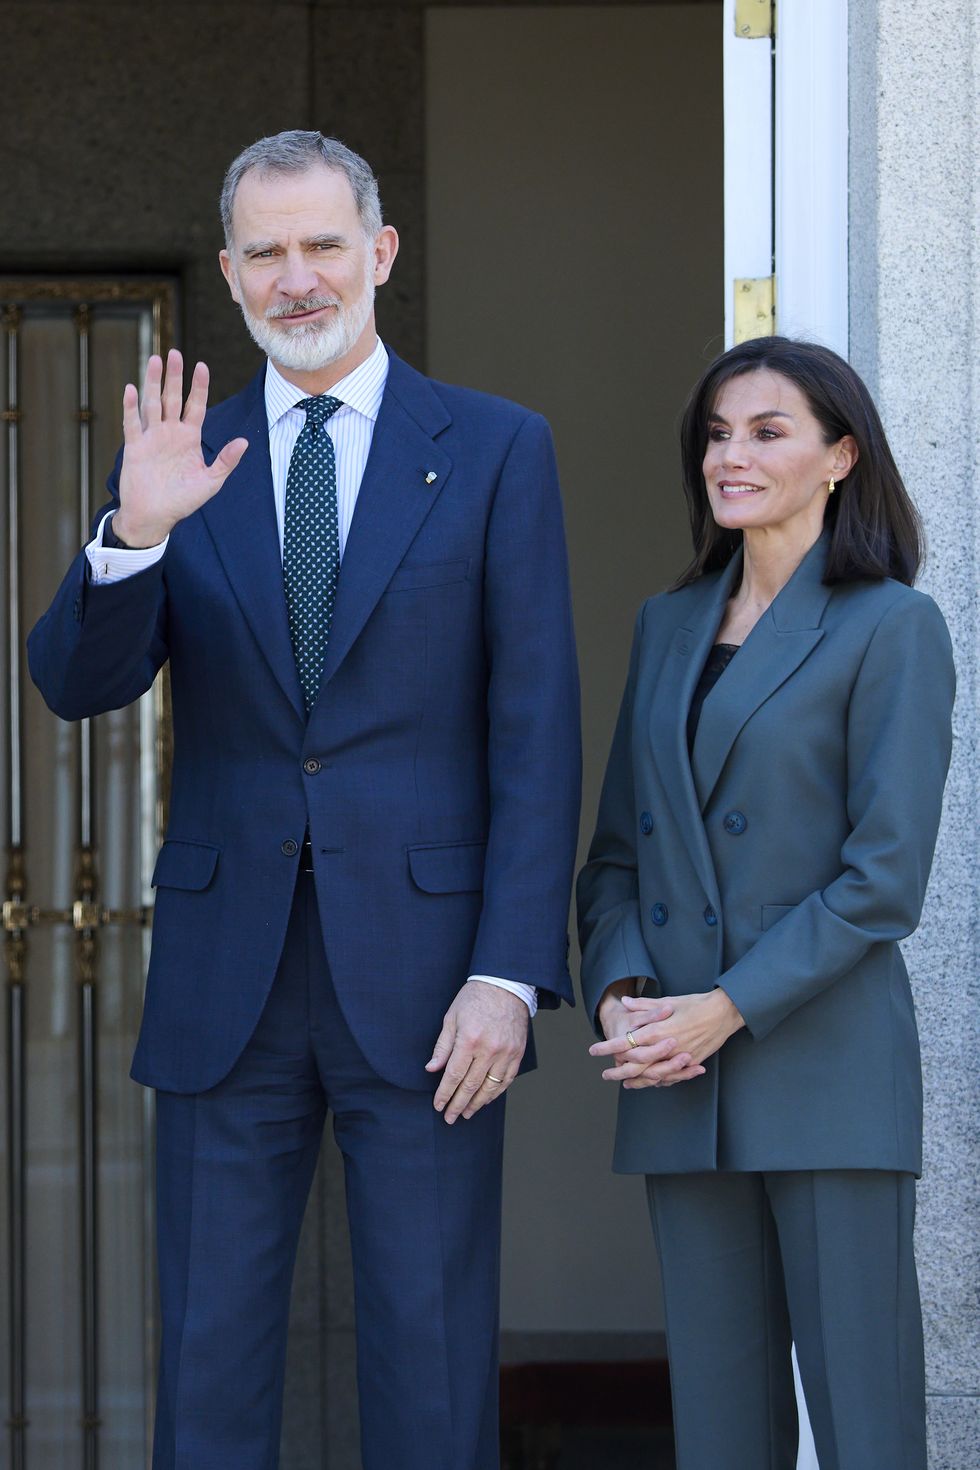 spanish royals host a lunch for the president of paraguay and his wife